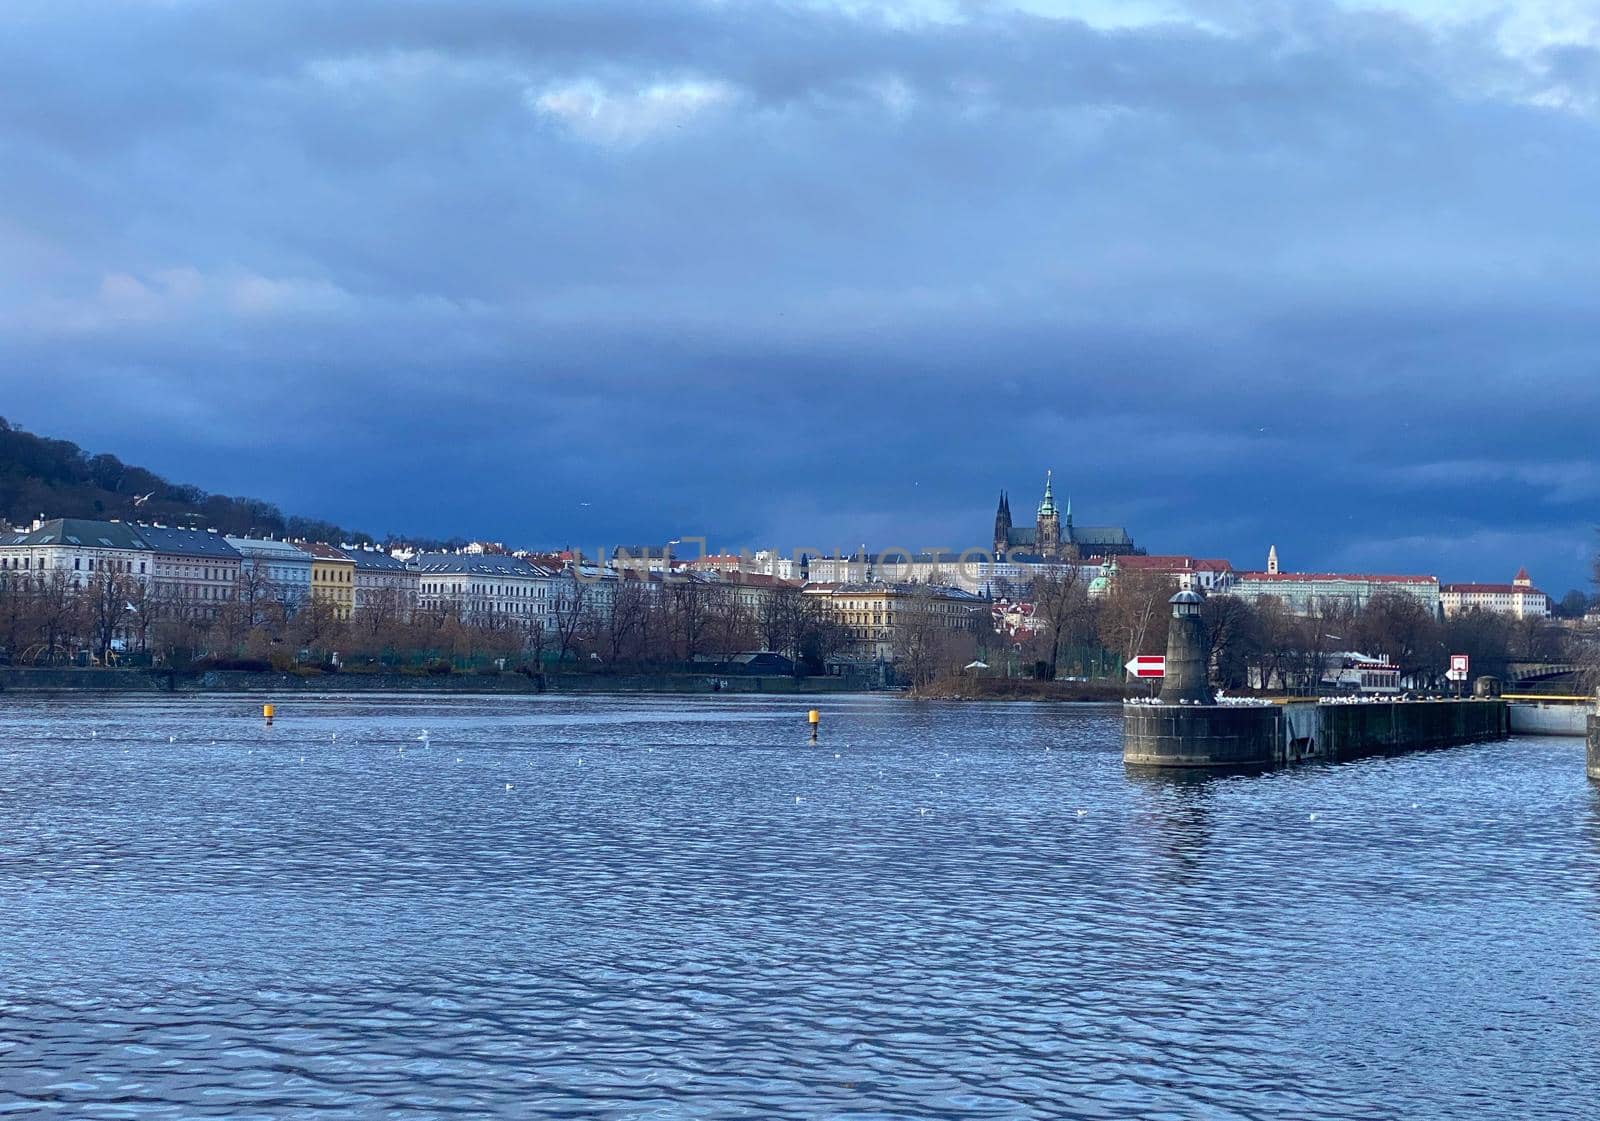 A view of the Prague Castle in the early evening, view from the Jirasek Bridge.